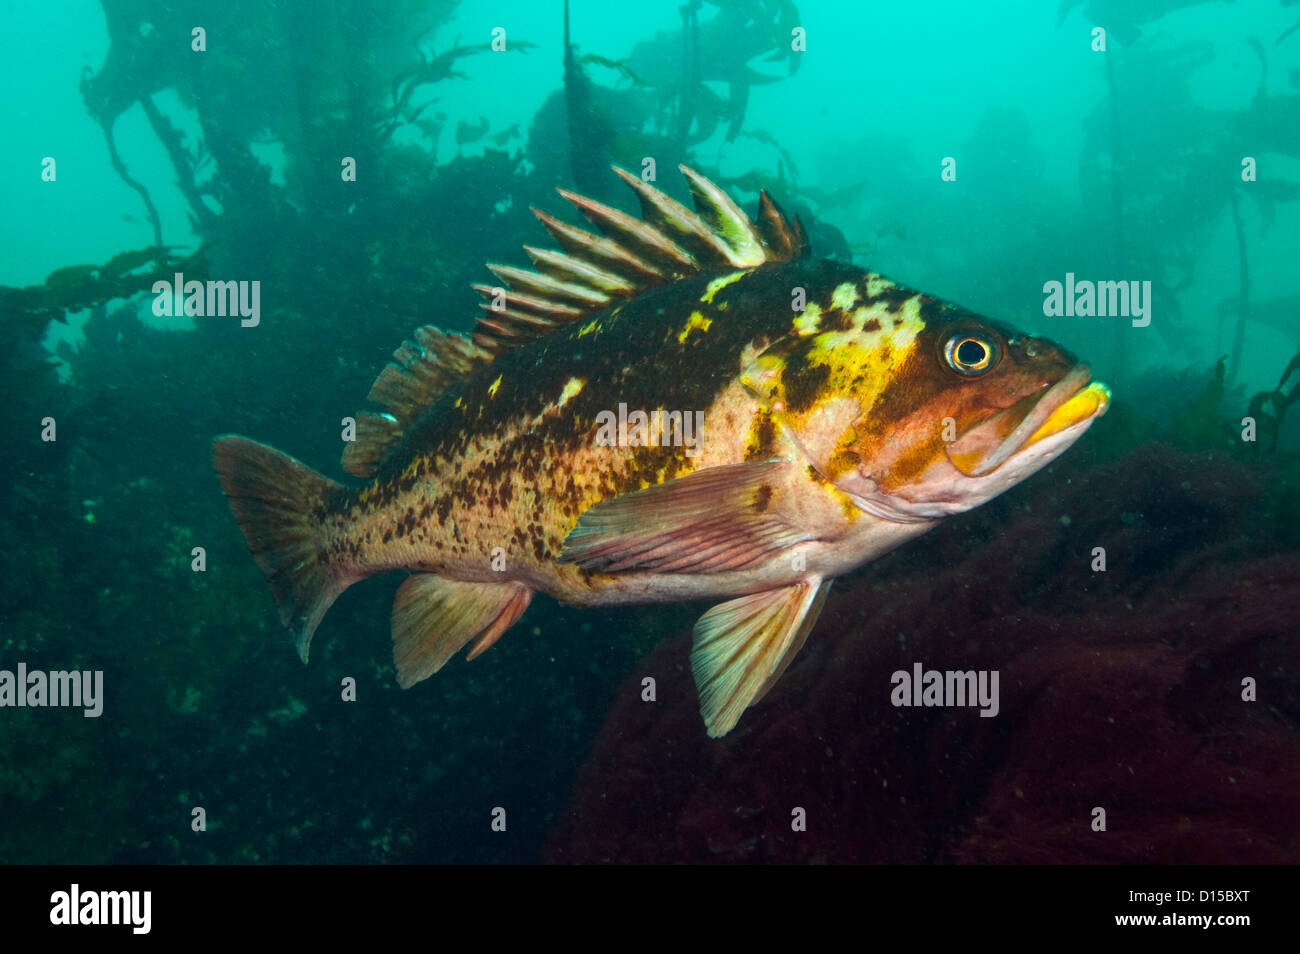 A Copper Rockfish, Sebastes caurinus, hides among the kelp of Browning Passage in Vancouver Island, British Columbia, Canada Stock Photo